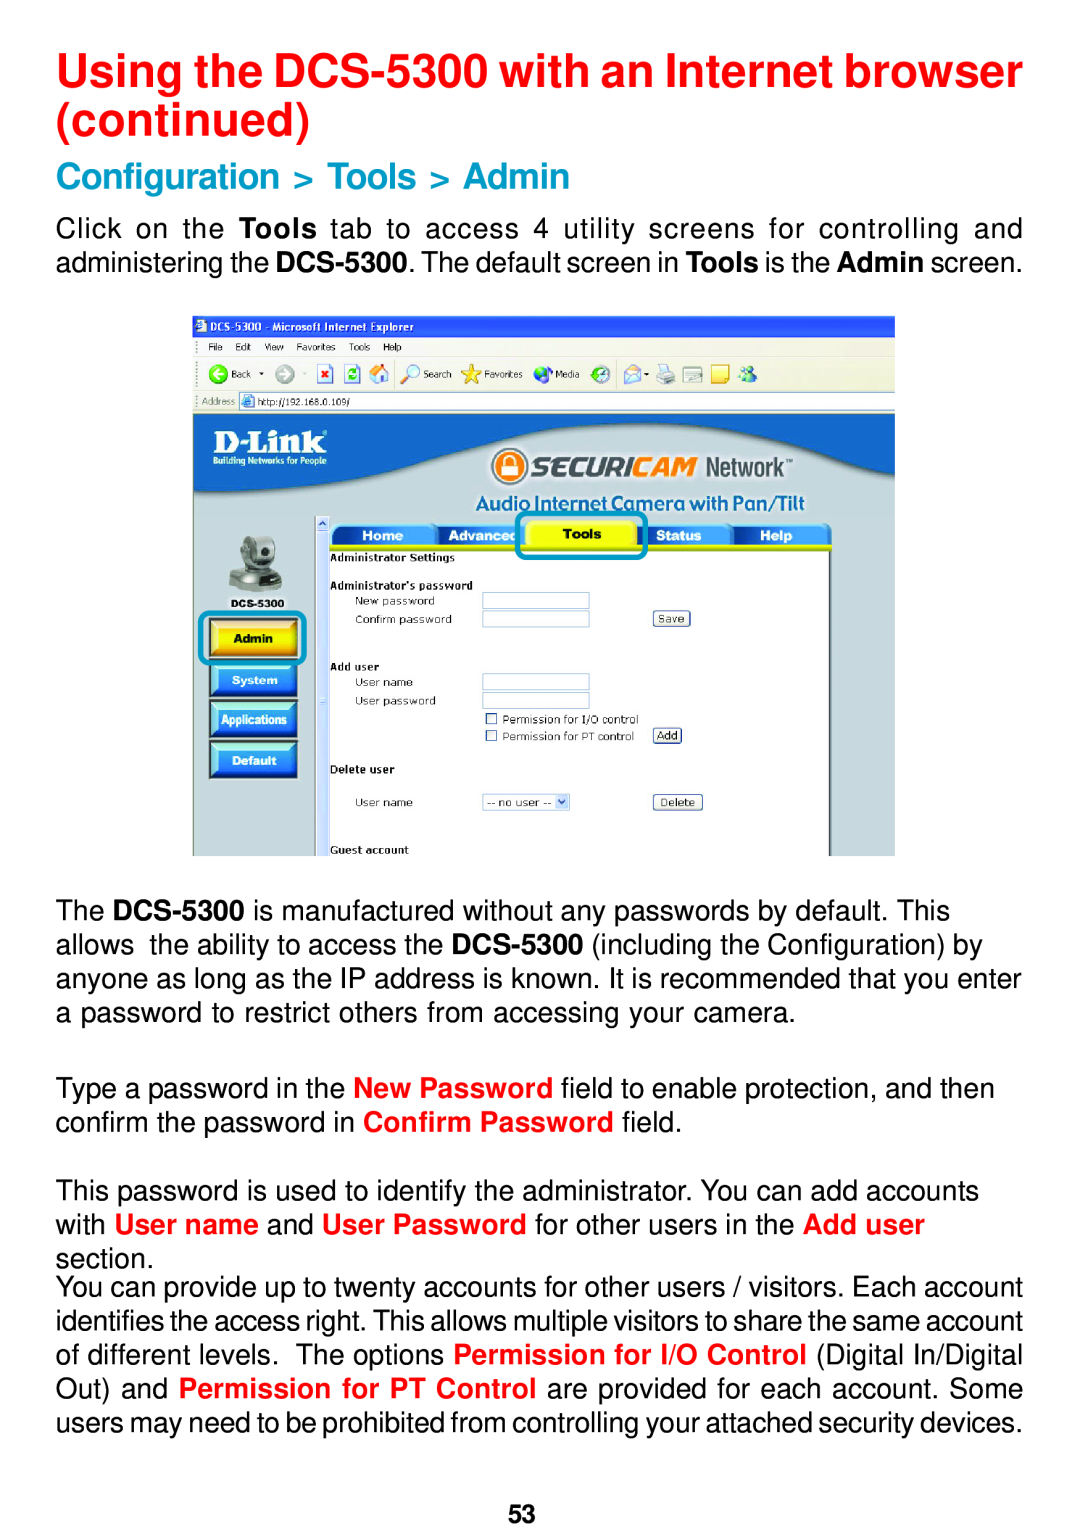 D-Link manual Configuration Tools Admin, Using the DCS-5300 with an Internet browser continued 